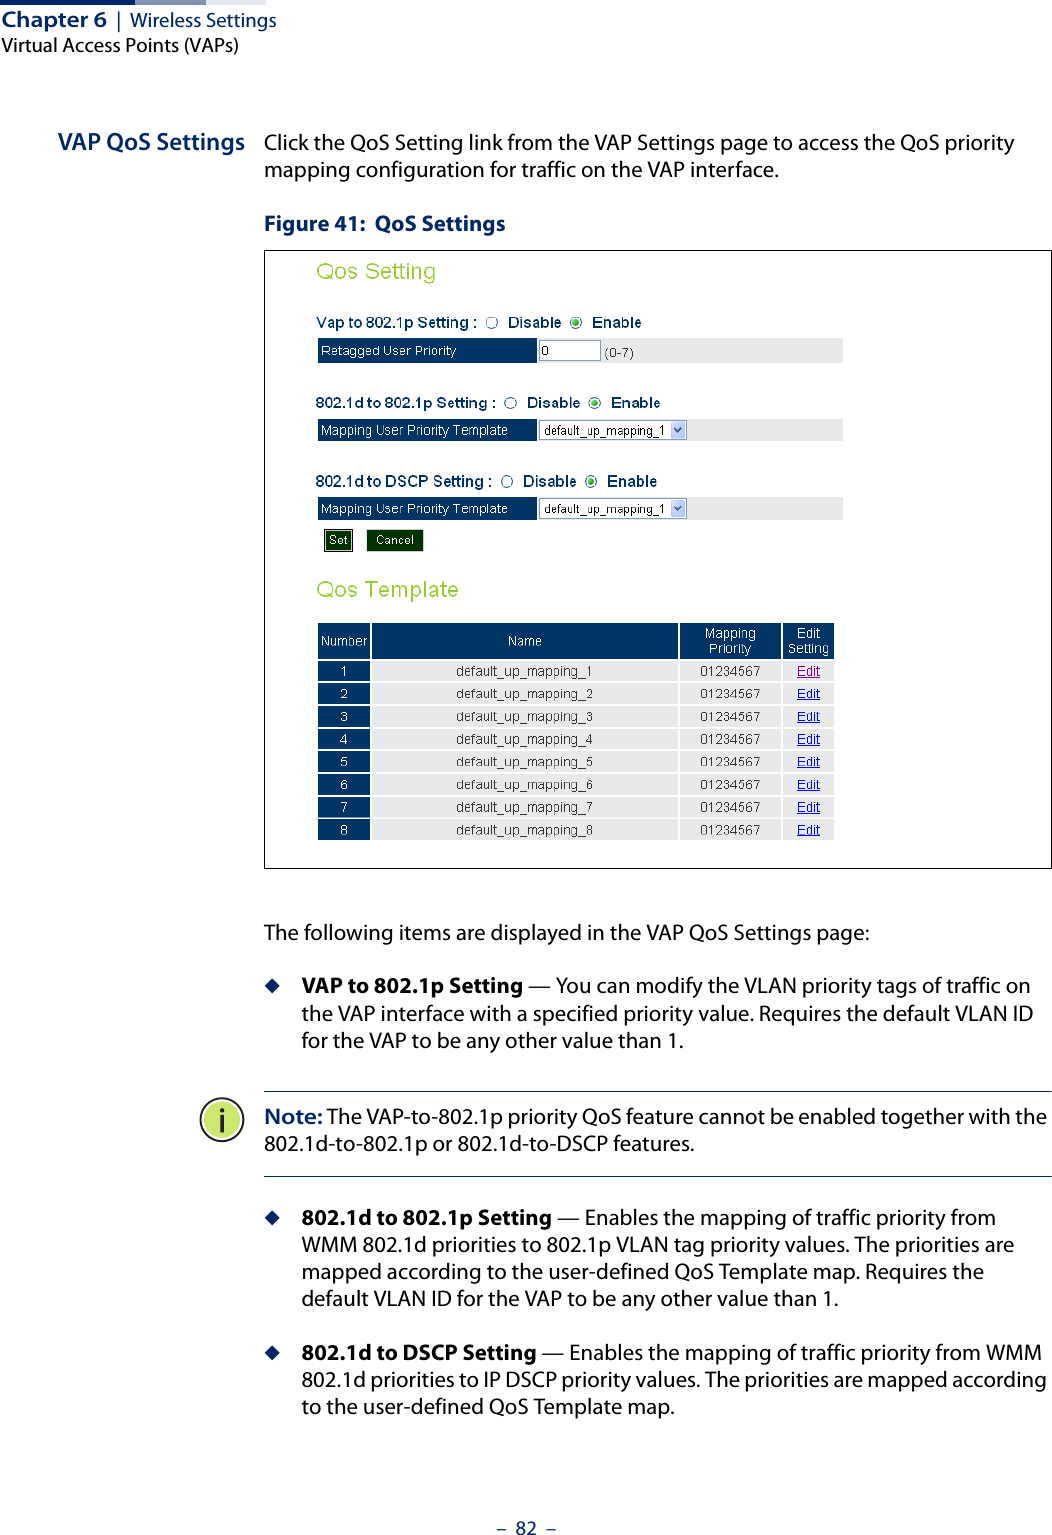 Chapter 6  |  Wireless SettingsVirtual Access Points (VAPs)–  82  –VAP QoS Settings Click the QoS Setting link from the VAP Settings page to access the QoS priority mapping configuration for traffic on the VAP interface.Figure 41:  QoS SettingsThe following items are displayed in the VAP QoS Settings page:◆VAP to 802.1p Setting — You can modify the VLAN priority tags of traffic on the VAP interface with a specified priority value. Requires the default VLAN ID for the VAP to be any other value than 1. Note: The VAP-to-802.1p priority QoS feature cannot be enabled together with the 802.1d-to-802.1p or 802.1d-to-DSCP features.◆802.1d to 802.1p Setting — Enables the mapping of traffic priority from WMM 802.1d priorities to 802.1p VLAN tag priority values. The priorities are mapped according to the user-defined QoS Template map. Requires the default VLAN ID for the VAP to be any other value than 1.◆802.1d to DSCP Setting — Enables the mapping of traffic priority from WMM 802.1d priorities to IP DSCP priority values. The priorities are mapped according to the user-defined QoS Template map. 